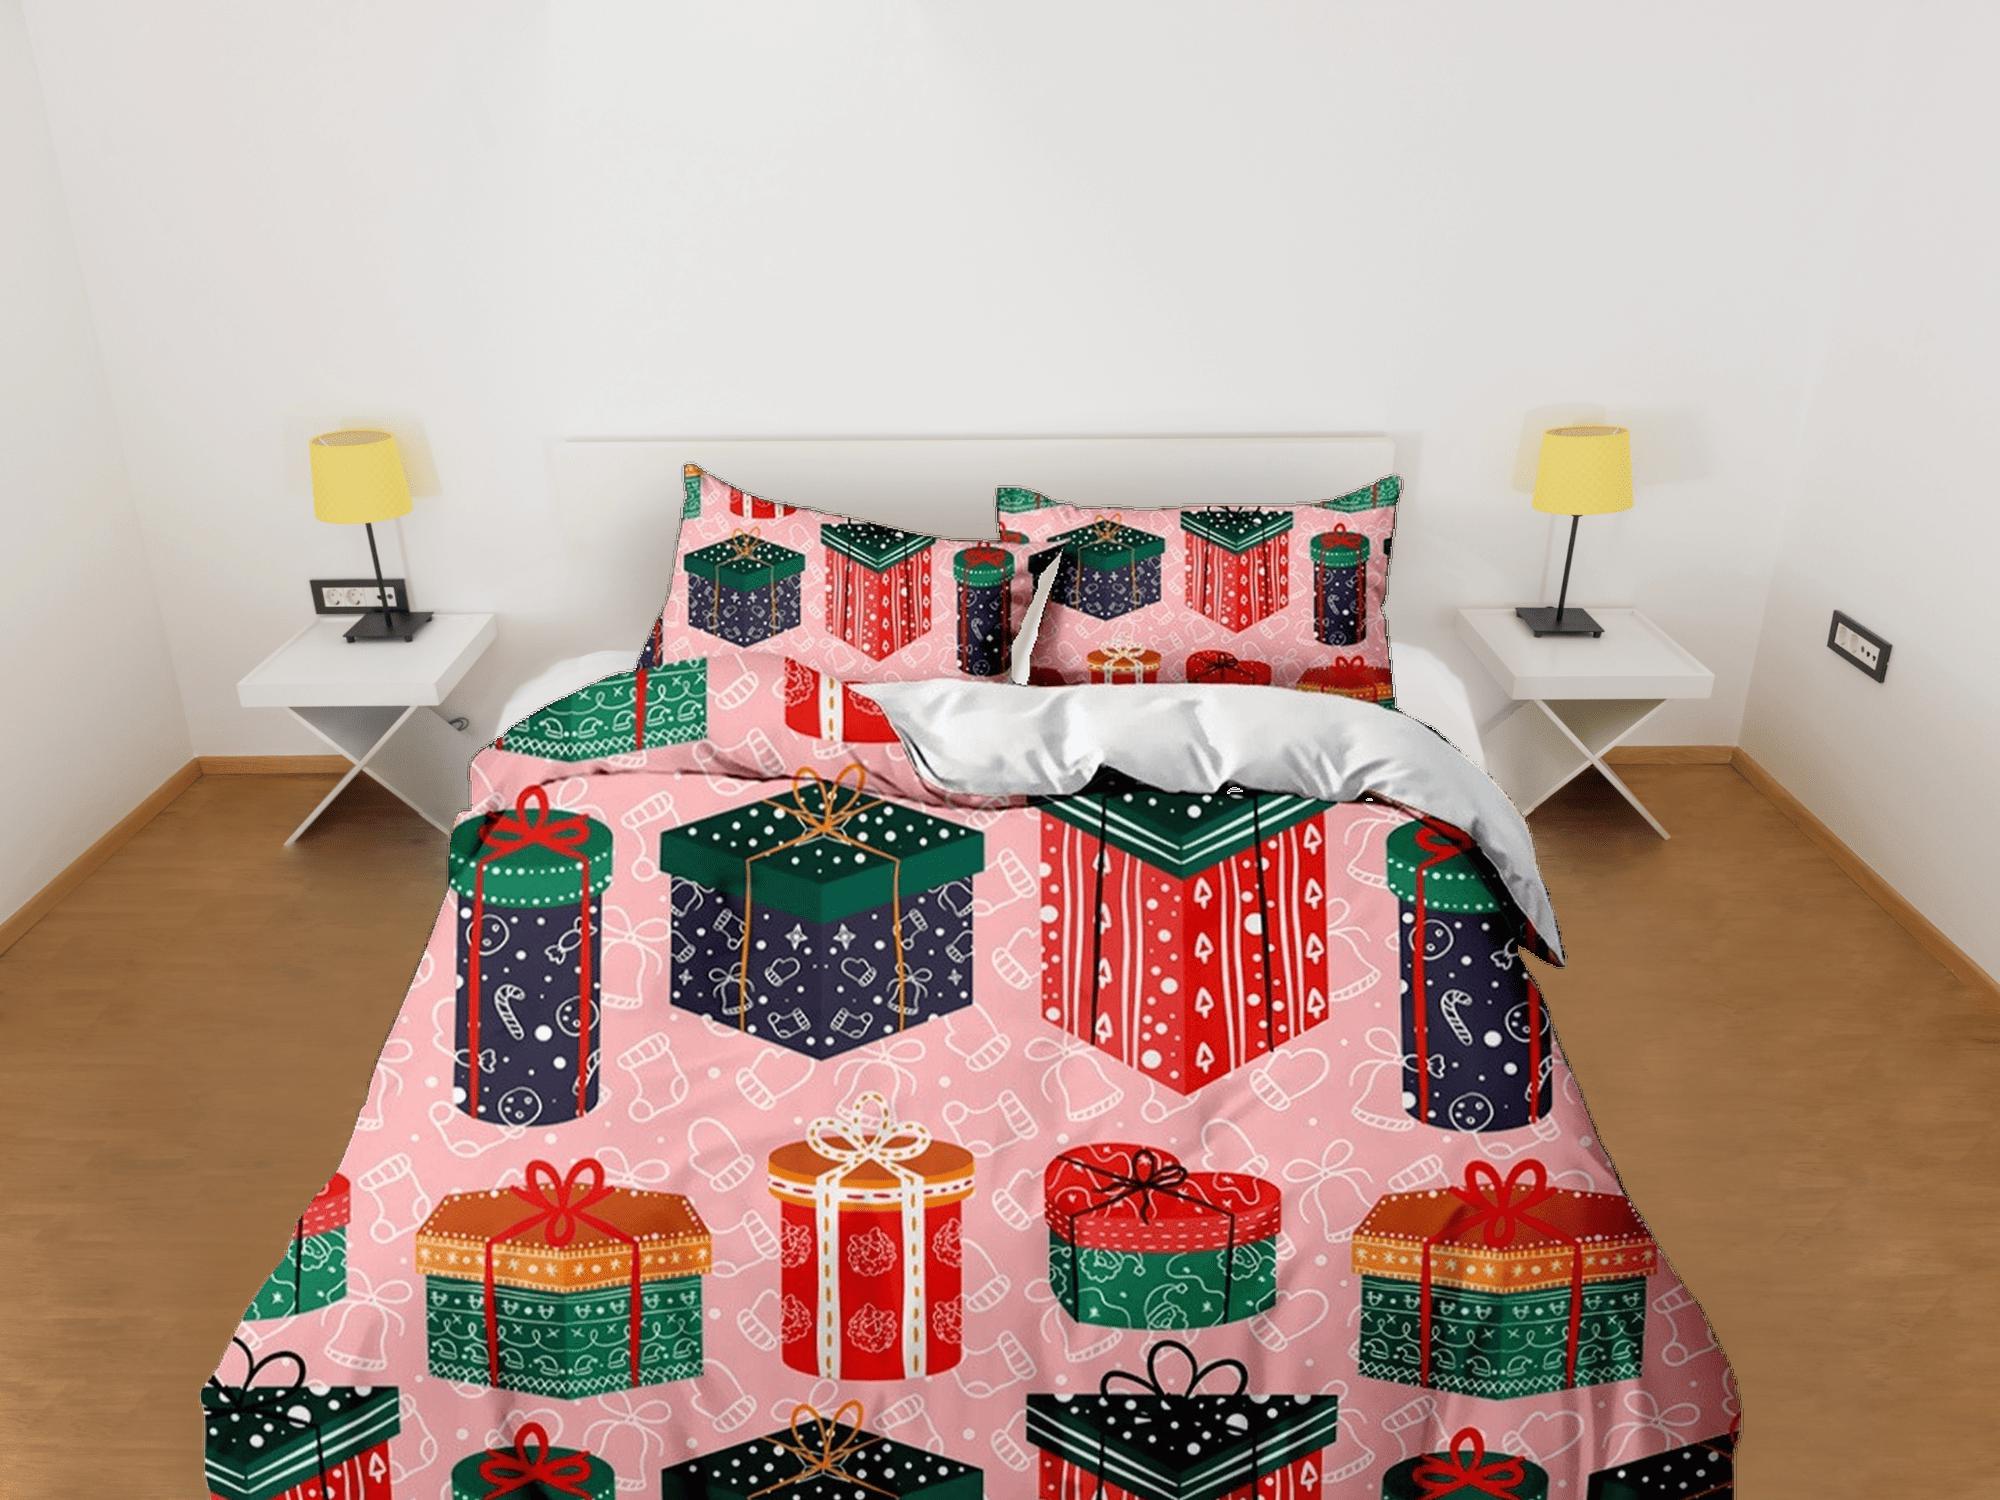 daintyduvet Colorful Christmas presents bedding, pillowcase holiday gift duvet cover king queen full twin toddler bedding baby Christmas farmhouse decor